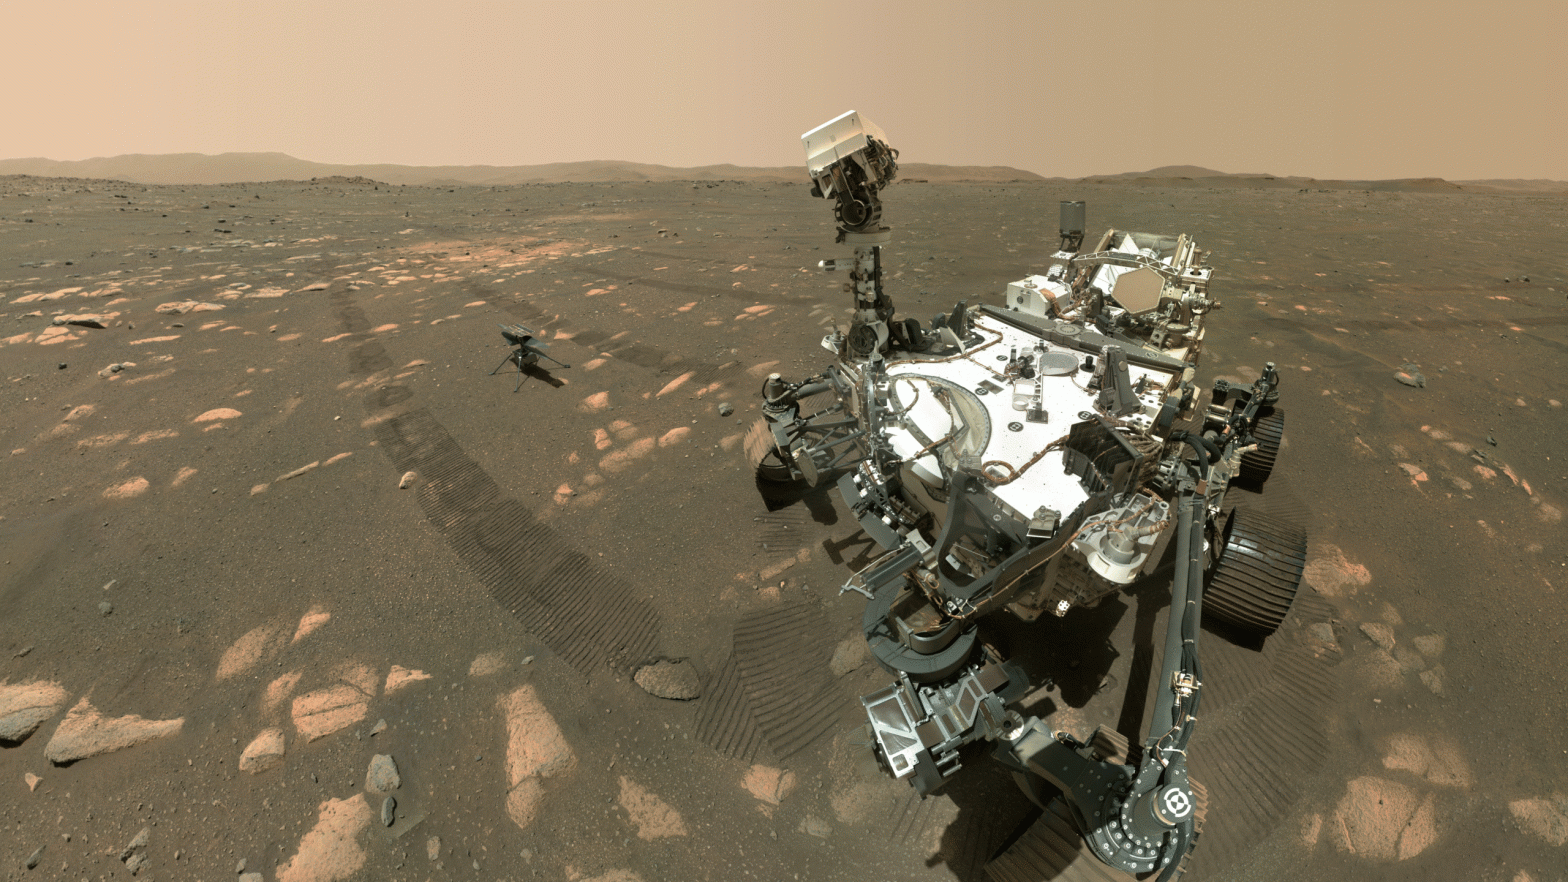 Perseverance and Ingenuity together on the surface of Mars. (Gif: NASA/JPL-Caltech/MSSS)